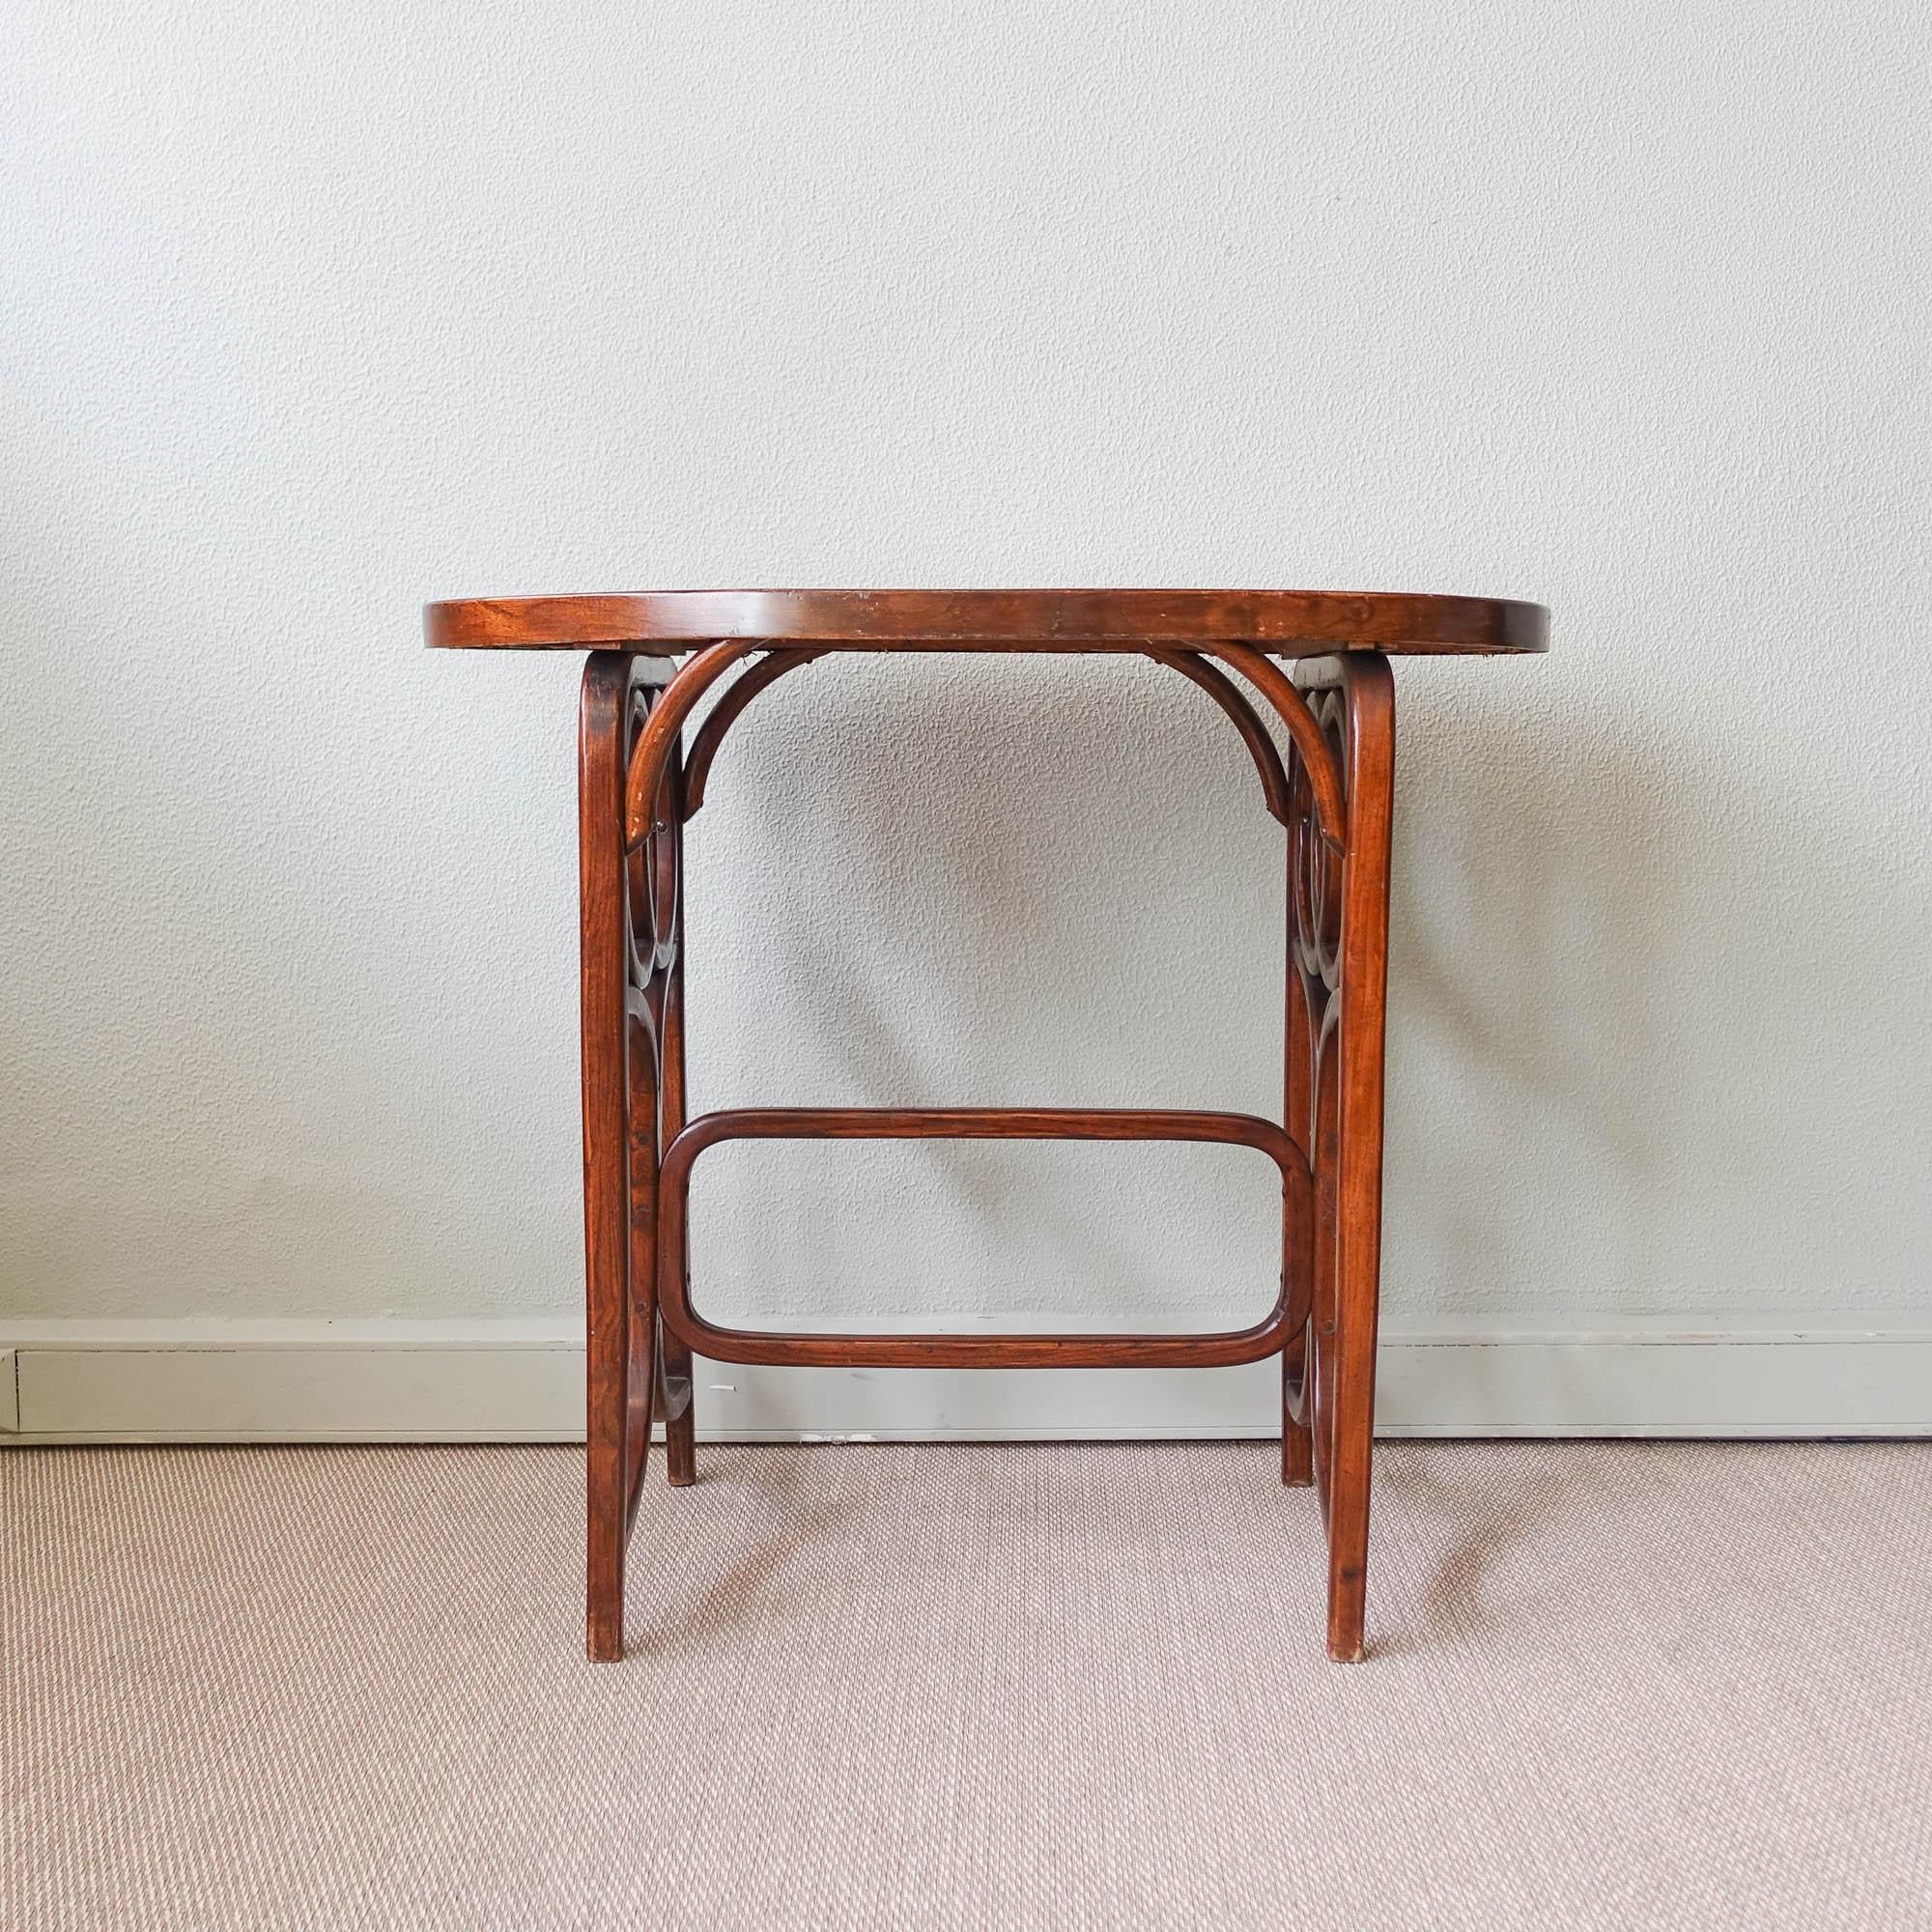 This bistro table was designed and produced by Thonet, in Austria, during the 1940's. It is made of cane wood and bentwood technique, with glass on top to protect. It is in original and good vintage condition.